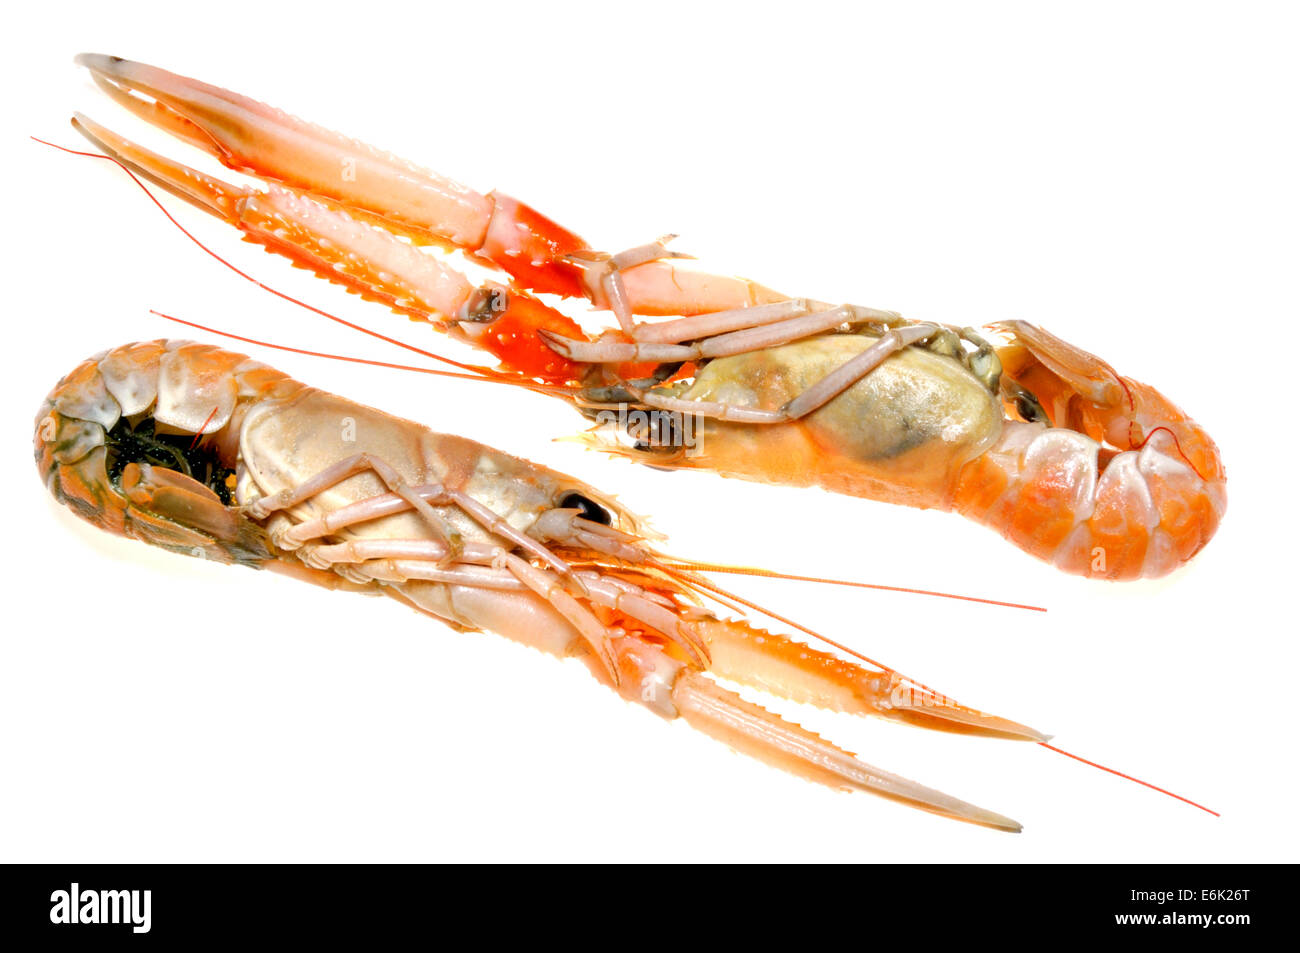 Raw Langoustine (Nephrops norvegicus) known as the Norway lobster, Dublin Bay prawn, or scampi Stock Photo